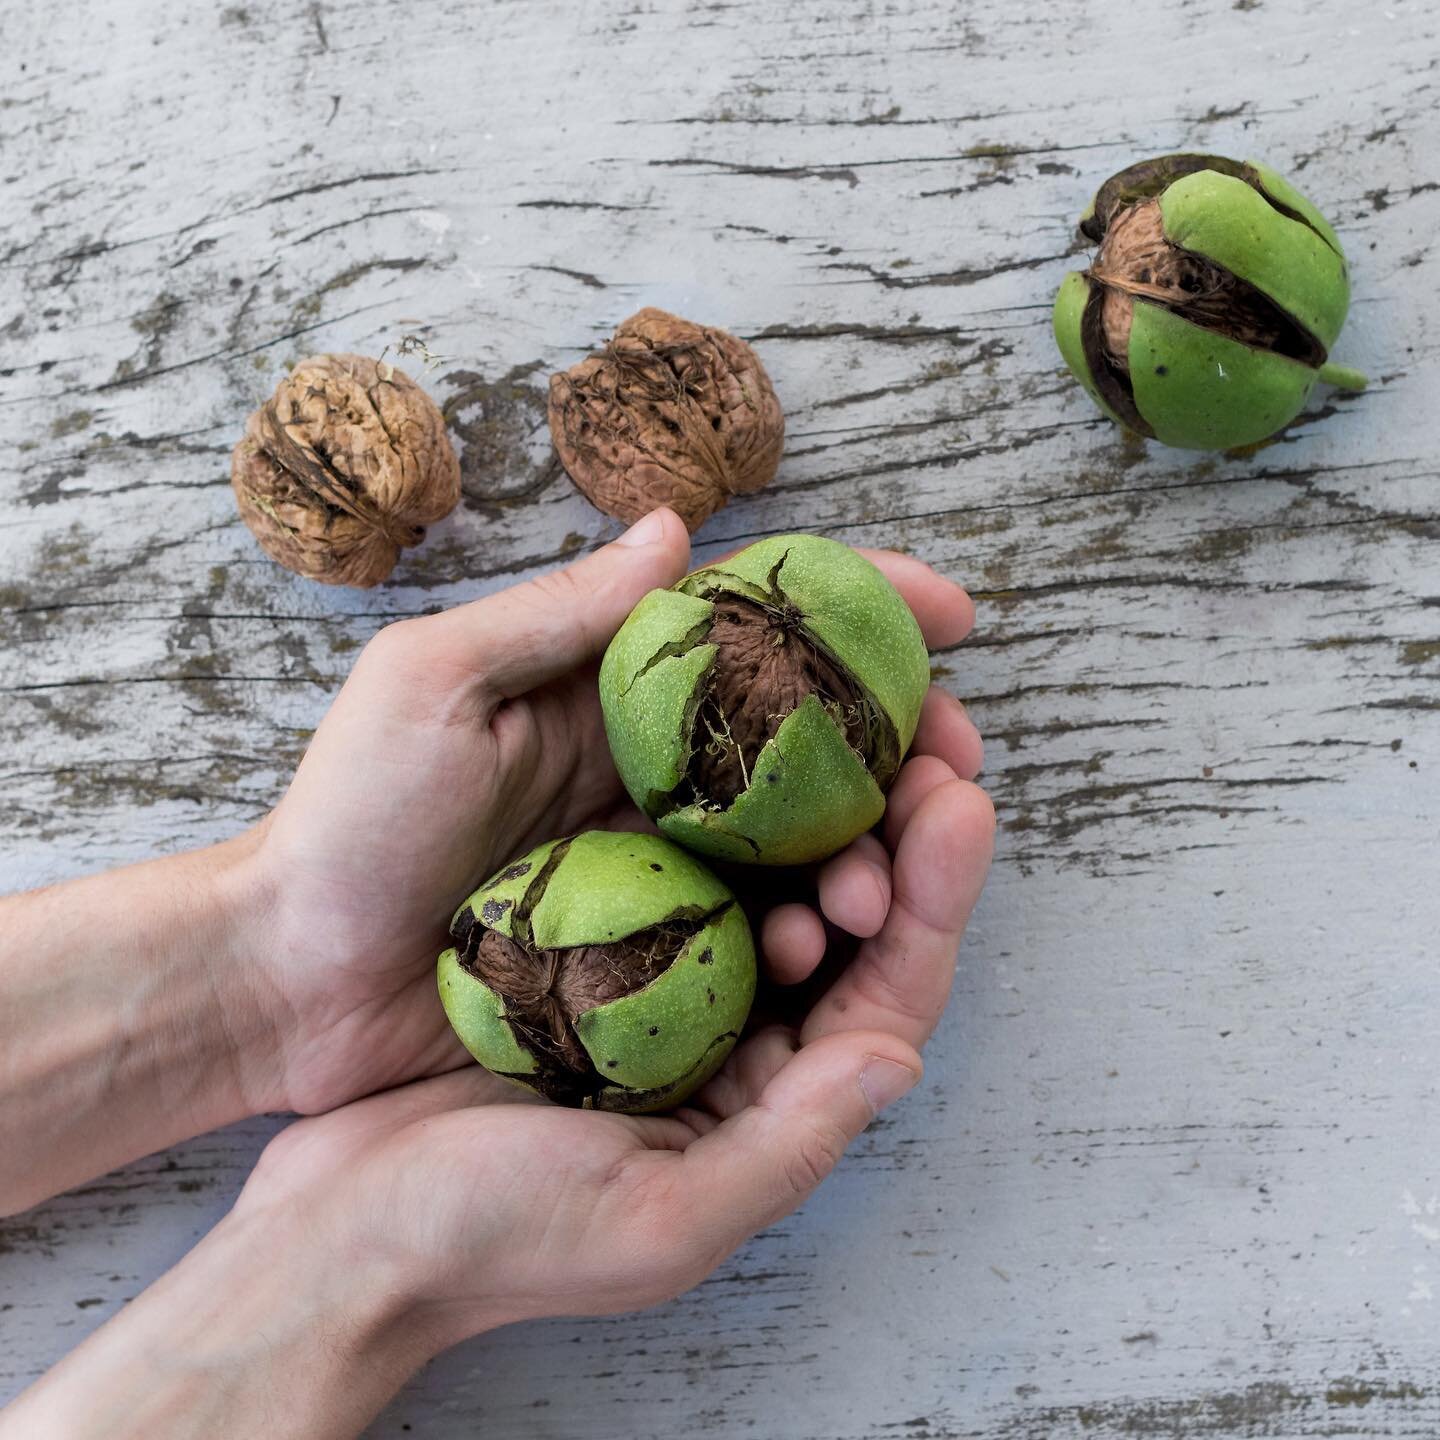 Do you love nuts? But have gut problems with them? Read at the *LINK IN BIO* to understand how mycotoxins can be contributing and what you can do about it. Delicious, easy recipes are included! #nuttyfornuts #nutsandguthealth #mycotoxins #guthealth #